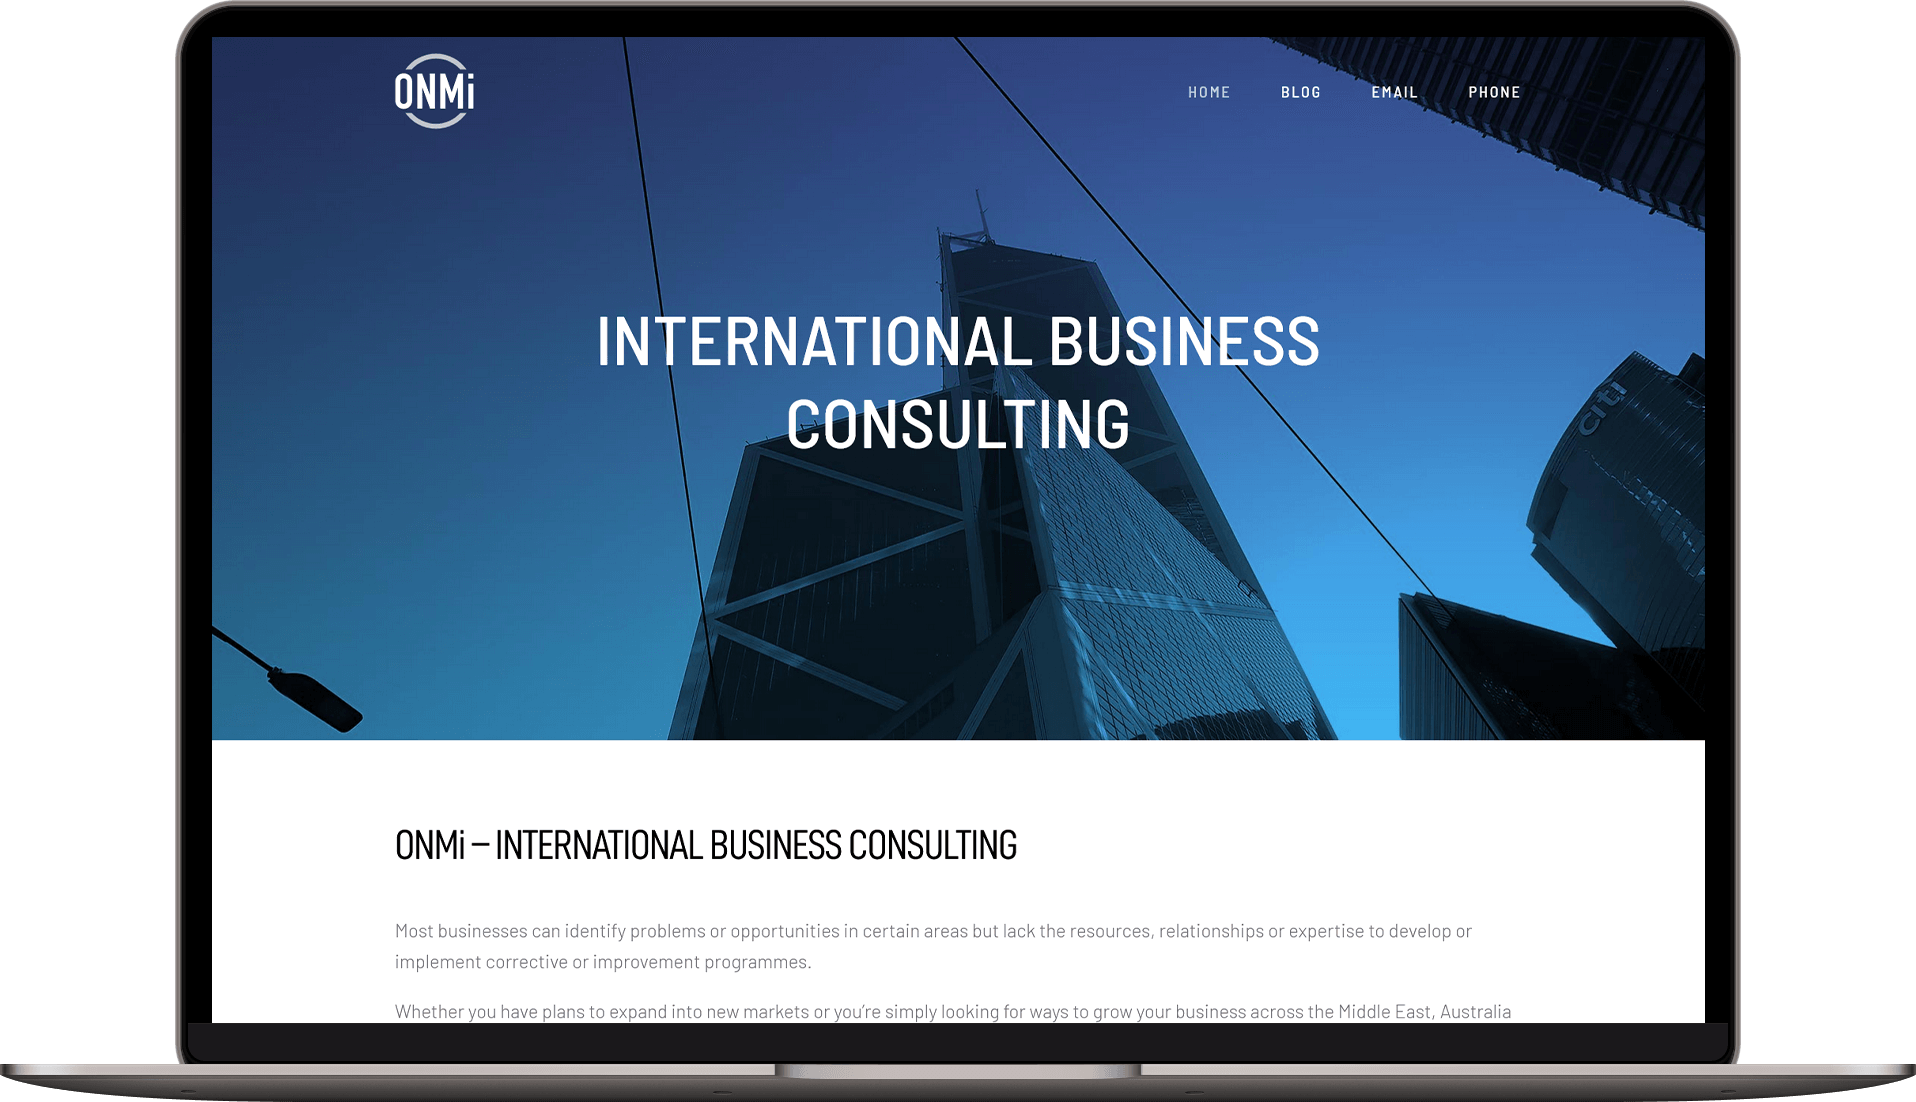 How did we come up with a desired online persona for an international business consulting firm?